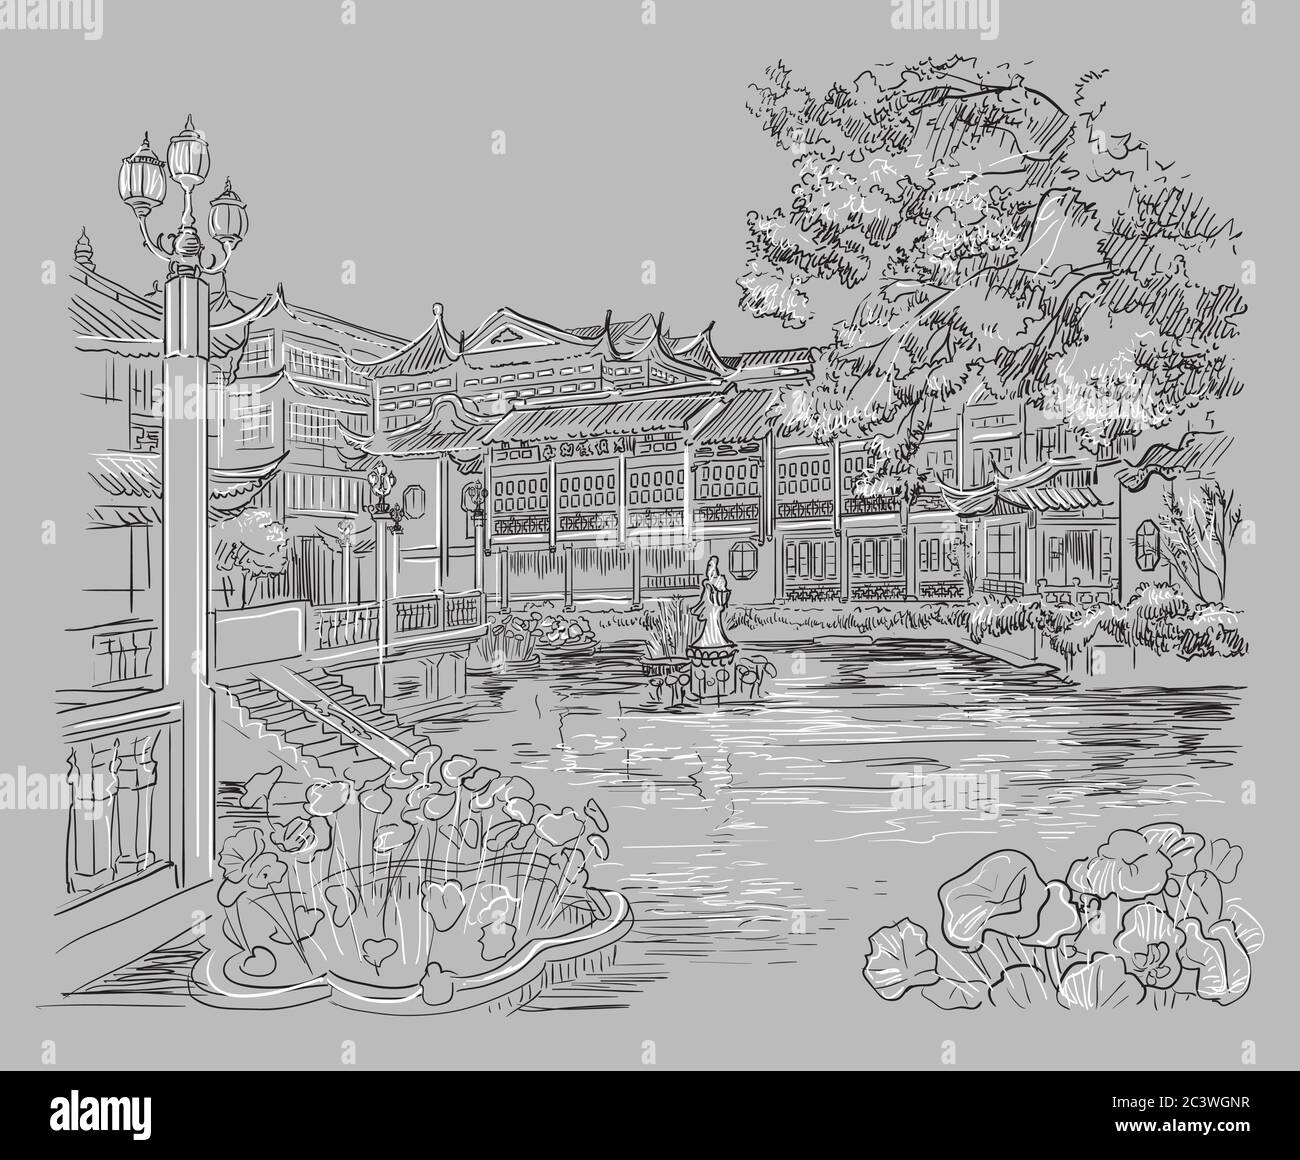 Yuyuan Garden (Garden of Happiness), Old City of Shanghai, landmark of China. Hand drawn monochrome vector sketch illustration isolated on gray backgr Stock Vector